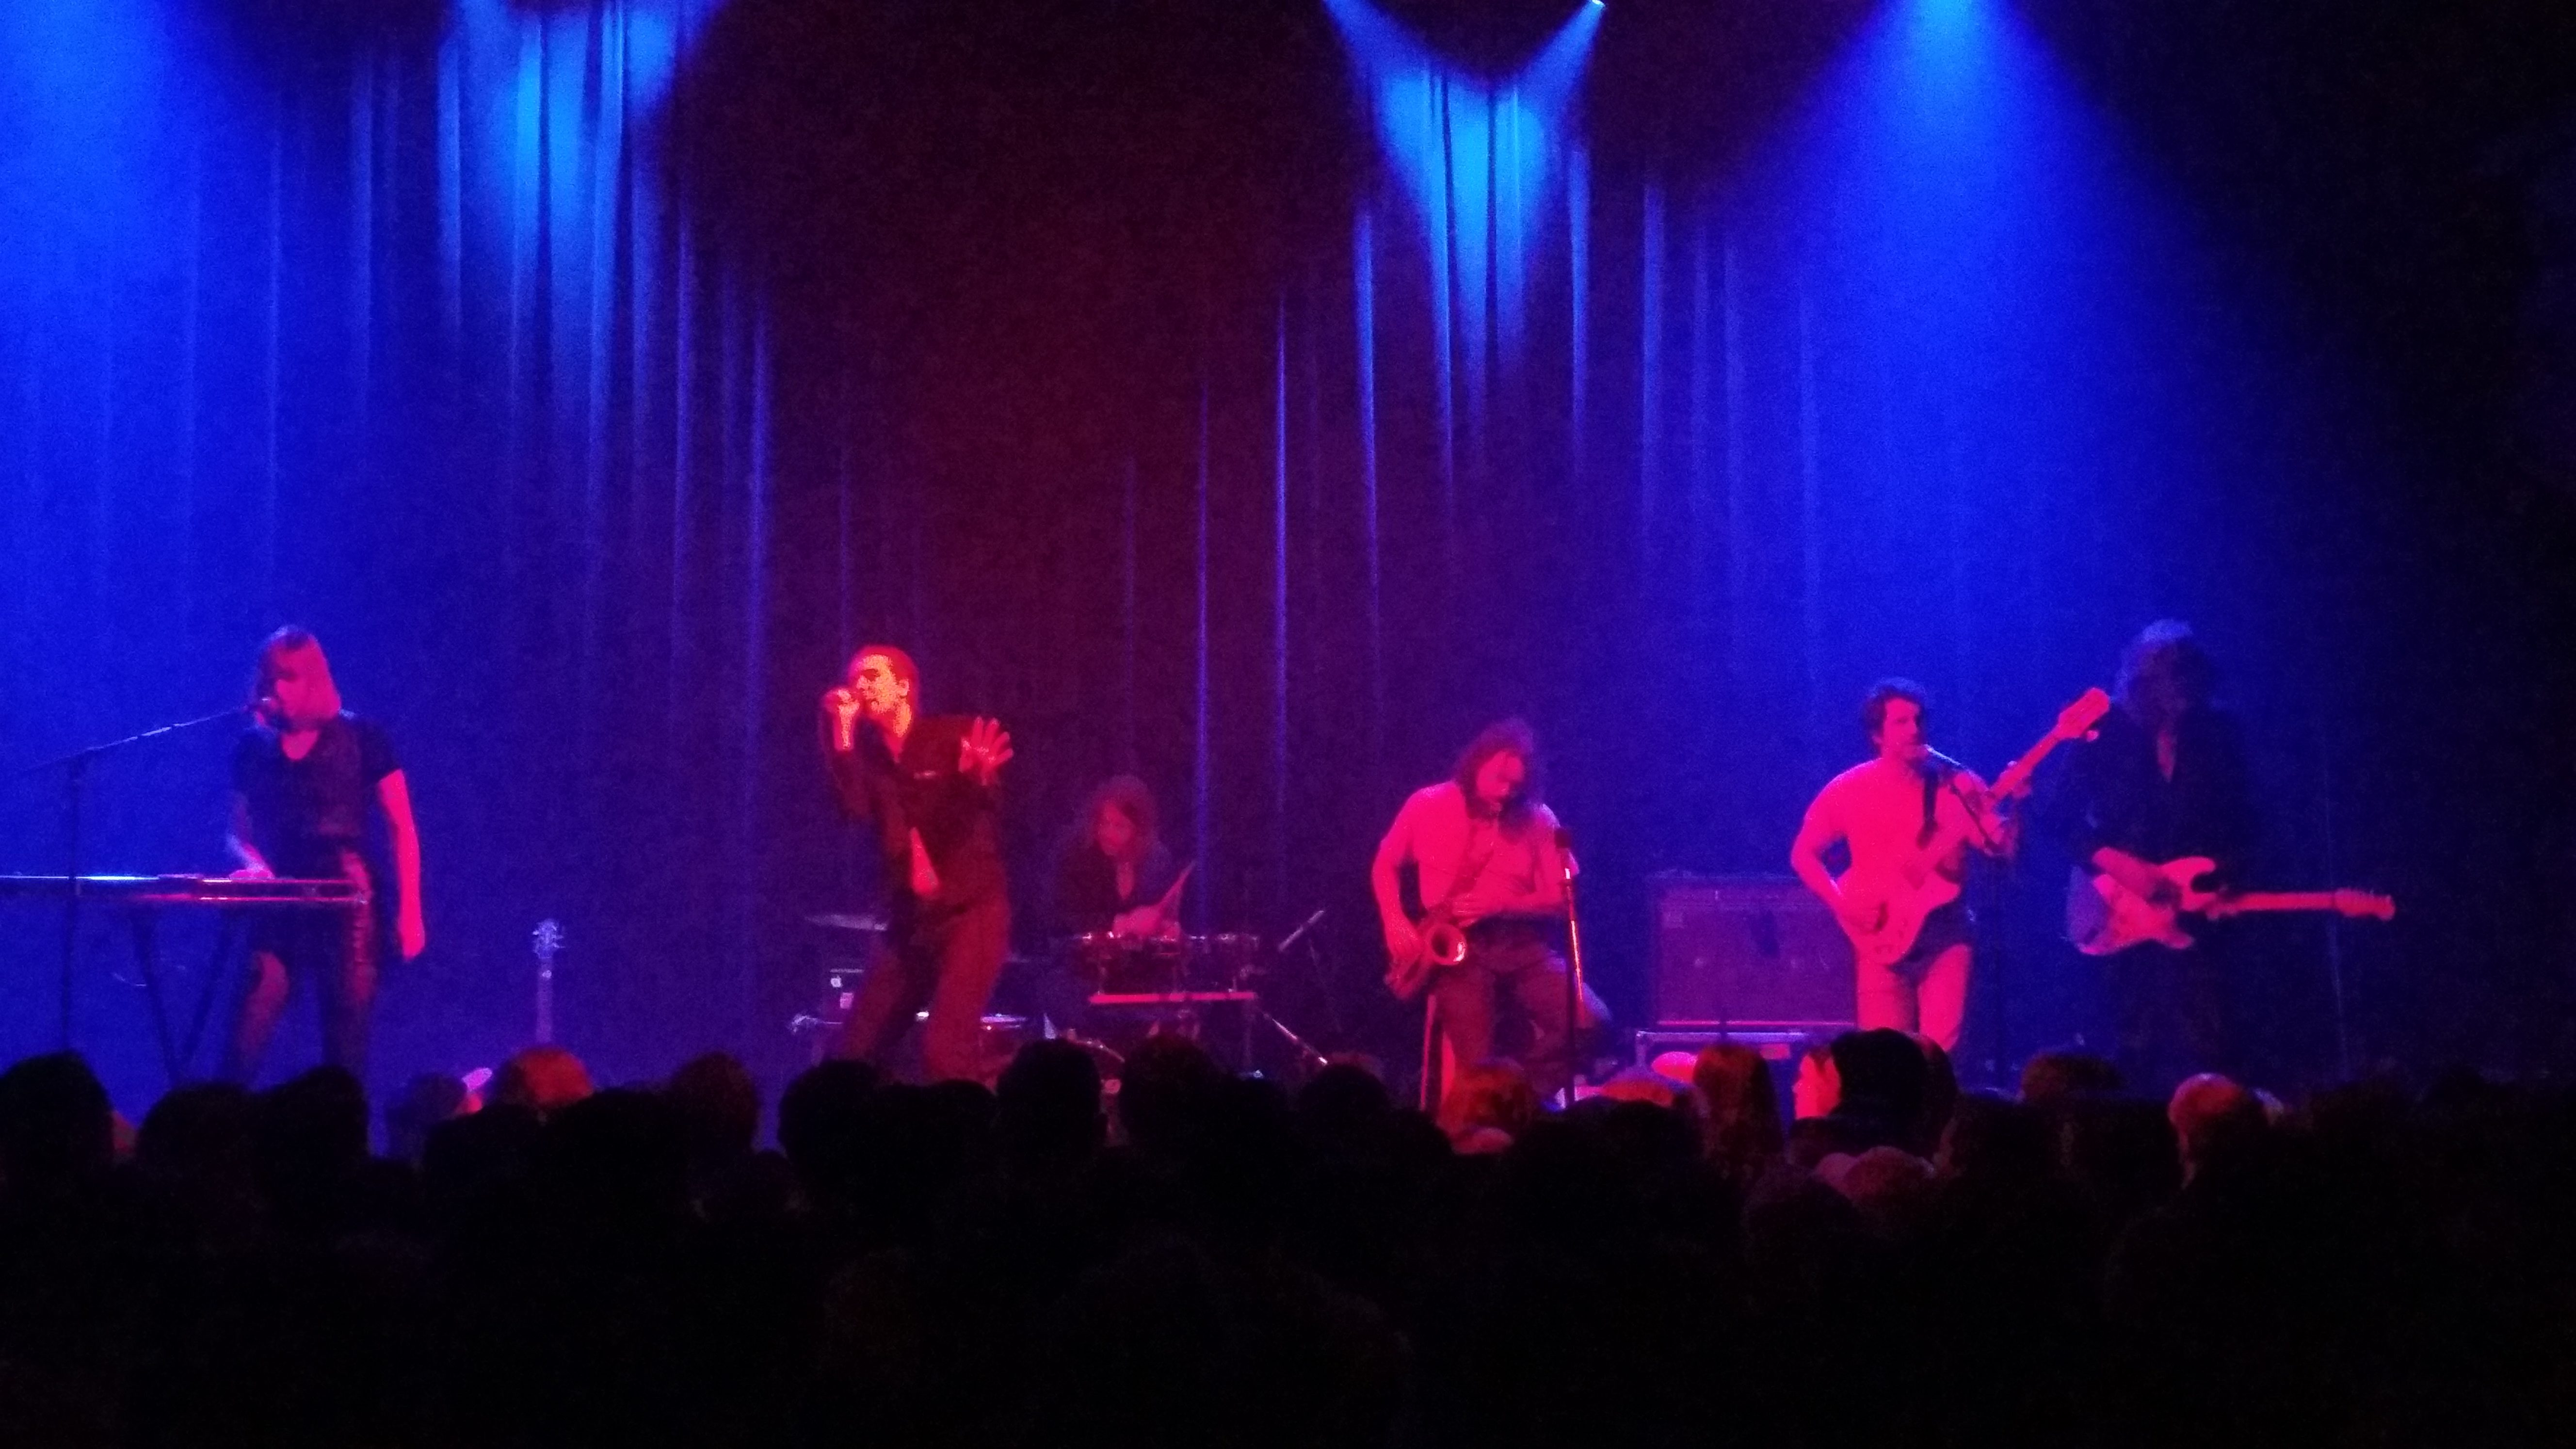 Review of Alex Cameron, Molly Burch, and Jack Ladder live at the Imperial in Vancouver